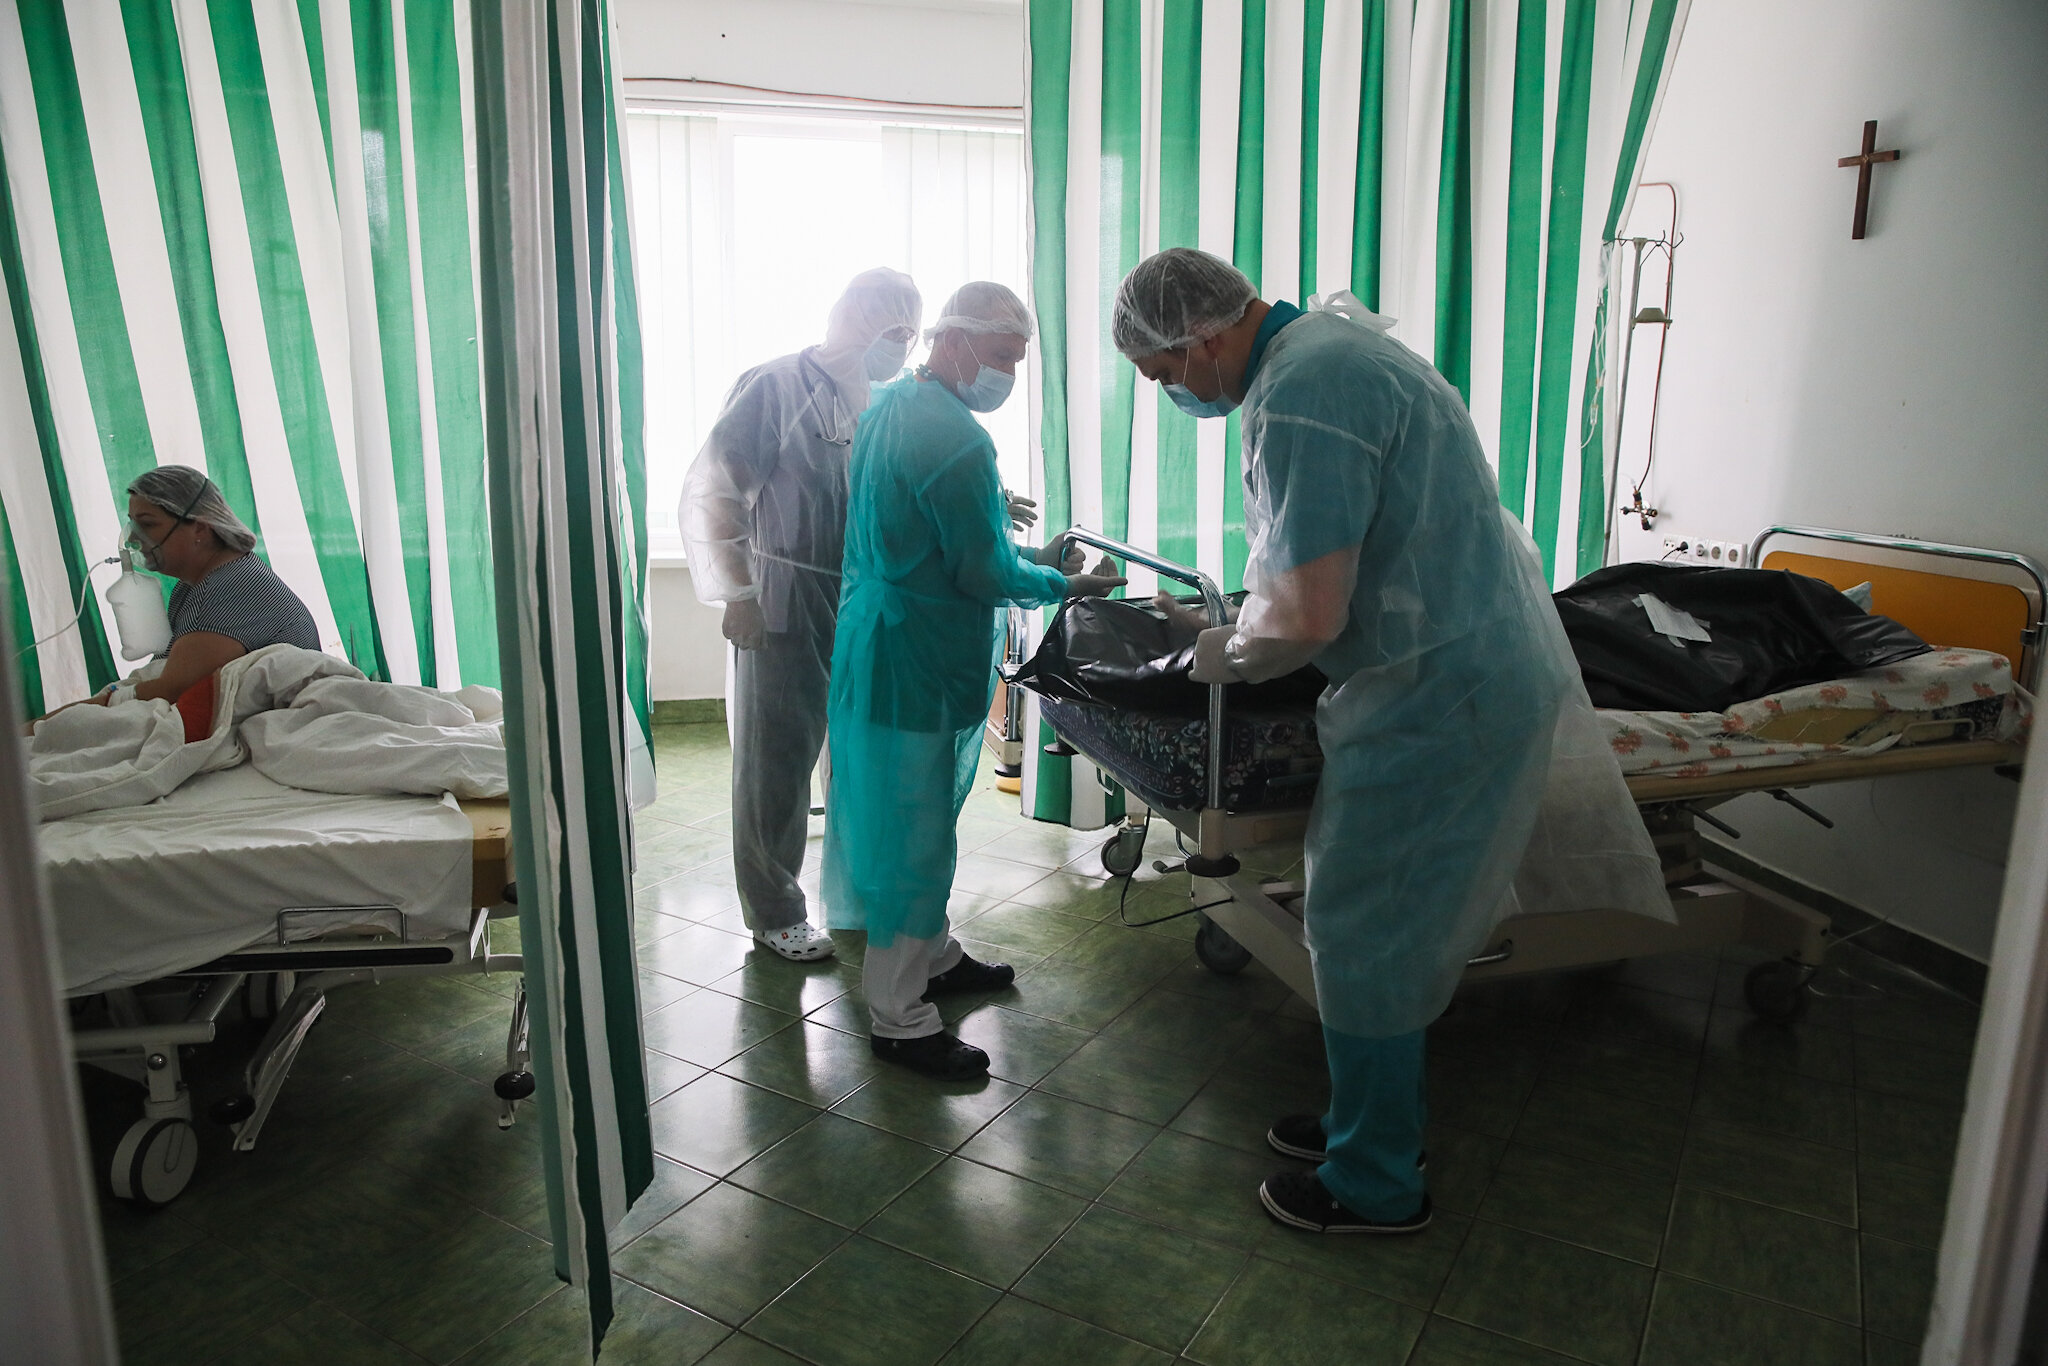 Medical workers transport the body of a patient who died of COVID-19 complications in the intensive care unit at Kolomyia District Hospital in Ivano-Frankivsk Oblast on March 16, 2021.